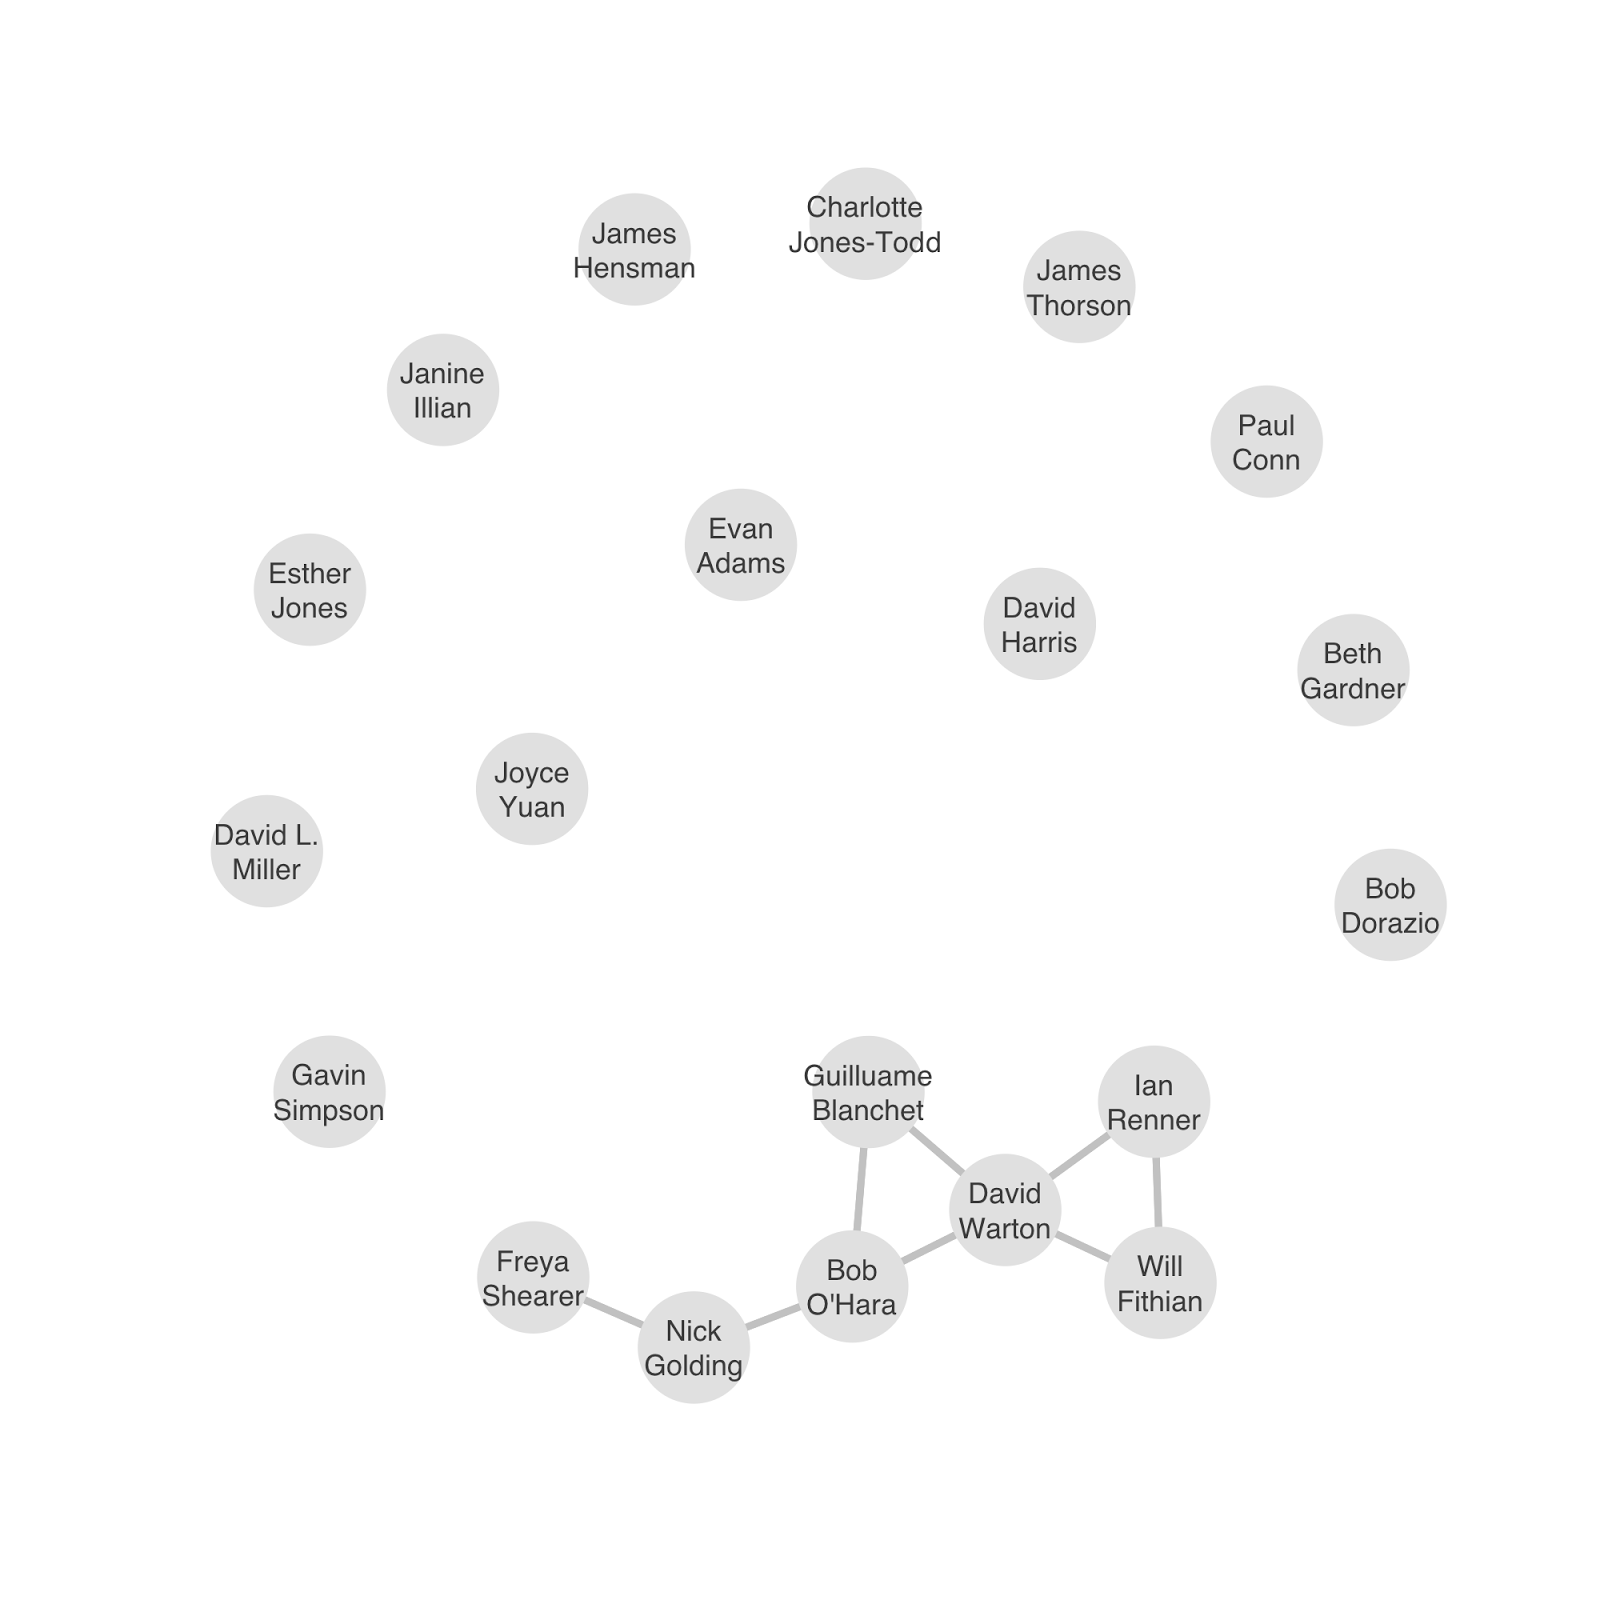 coauthorship_network.png